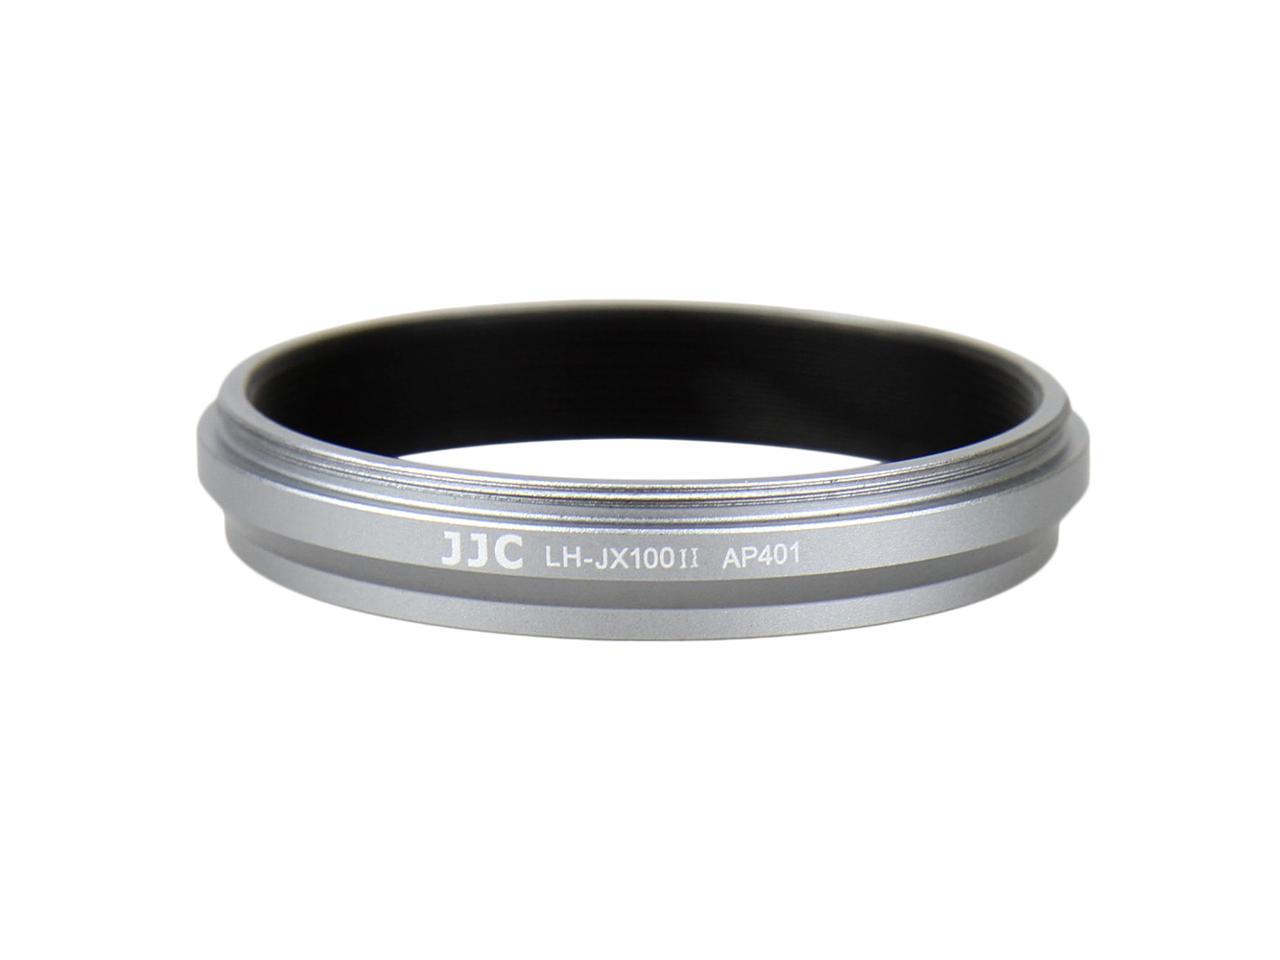 JJC LH-JX100II SILVER Upgrade Lens Hood Shade Adapter Ring for Fujifilm FinePix X100 X100S Replaces AR-X100 Silver